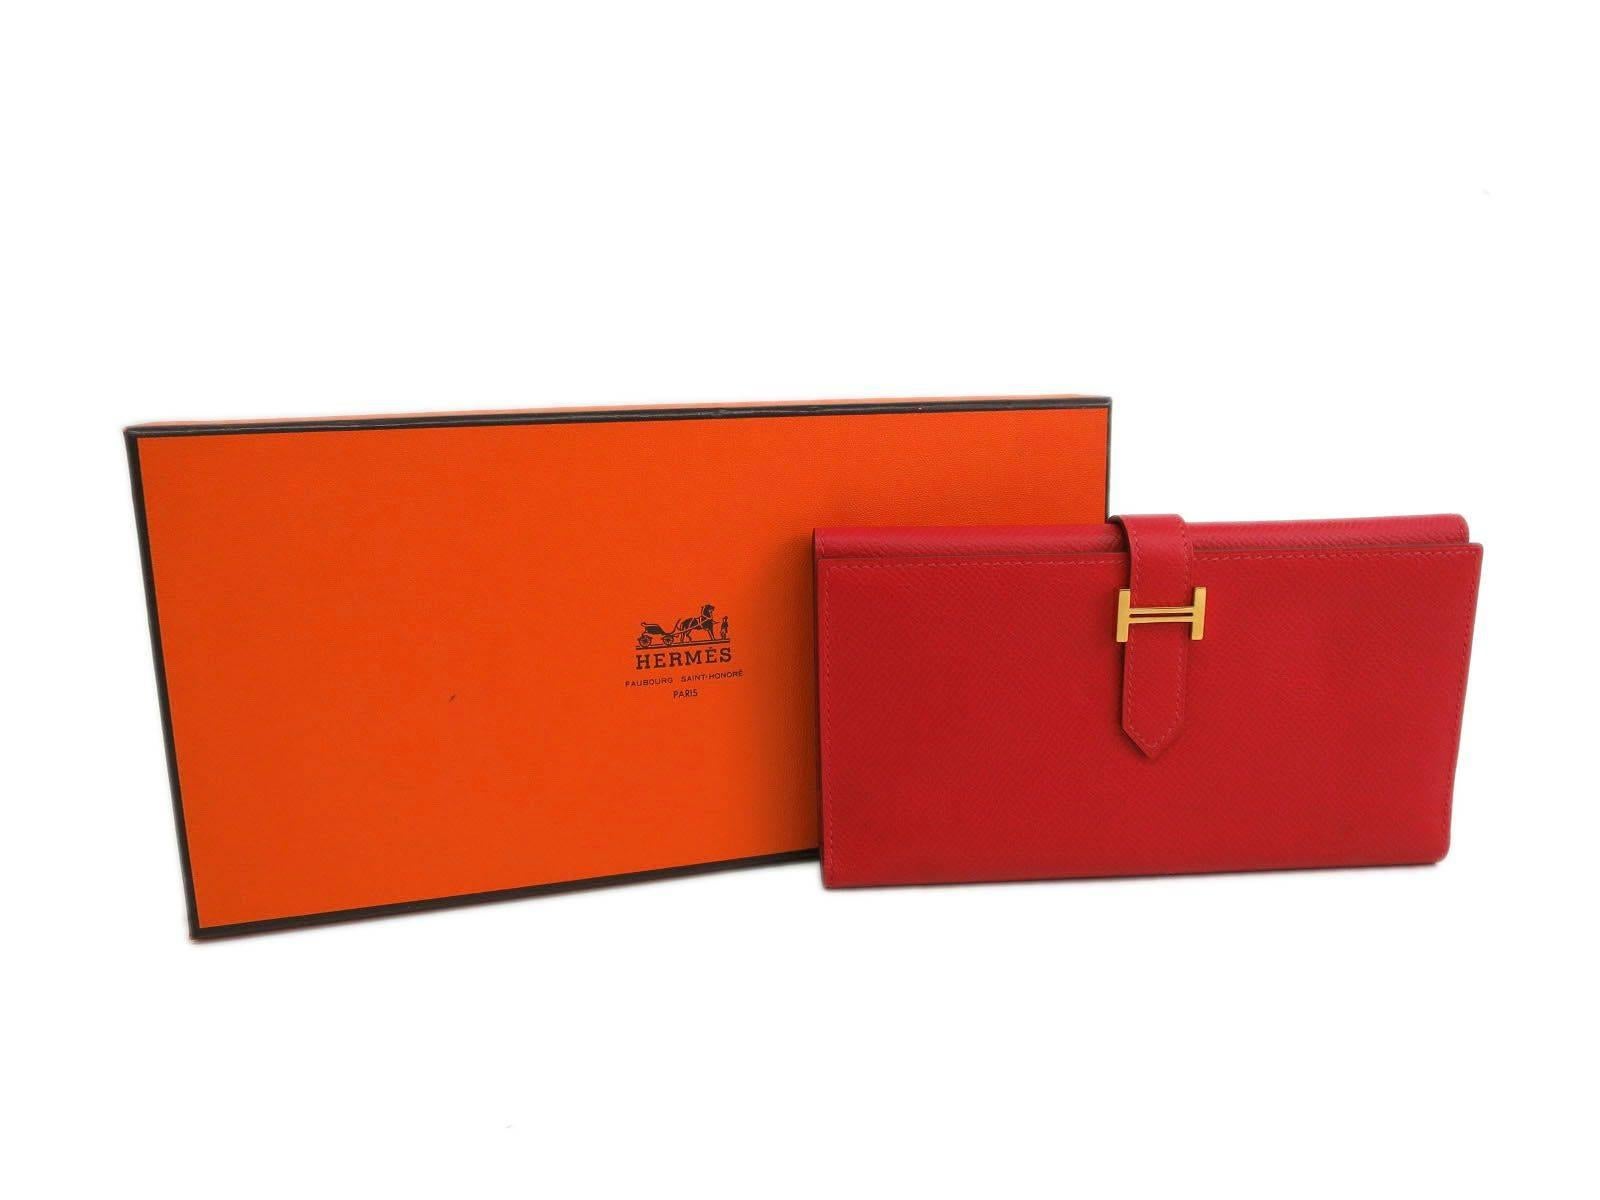 CURATOR'S NOTES

The ultimate accessory!  Stunning red Hermes Bearn 'H' wallet in the original Hermes box.  Priced to sell.

Retail price $2,650
Epsom leather
Gold hardware
Belt closure
Made in France
Date code Square O (2011) 
Measures